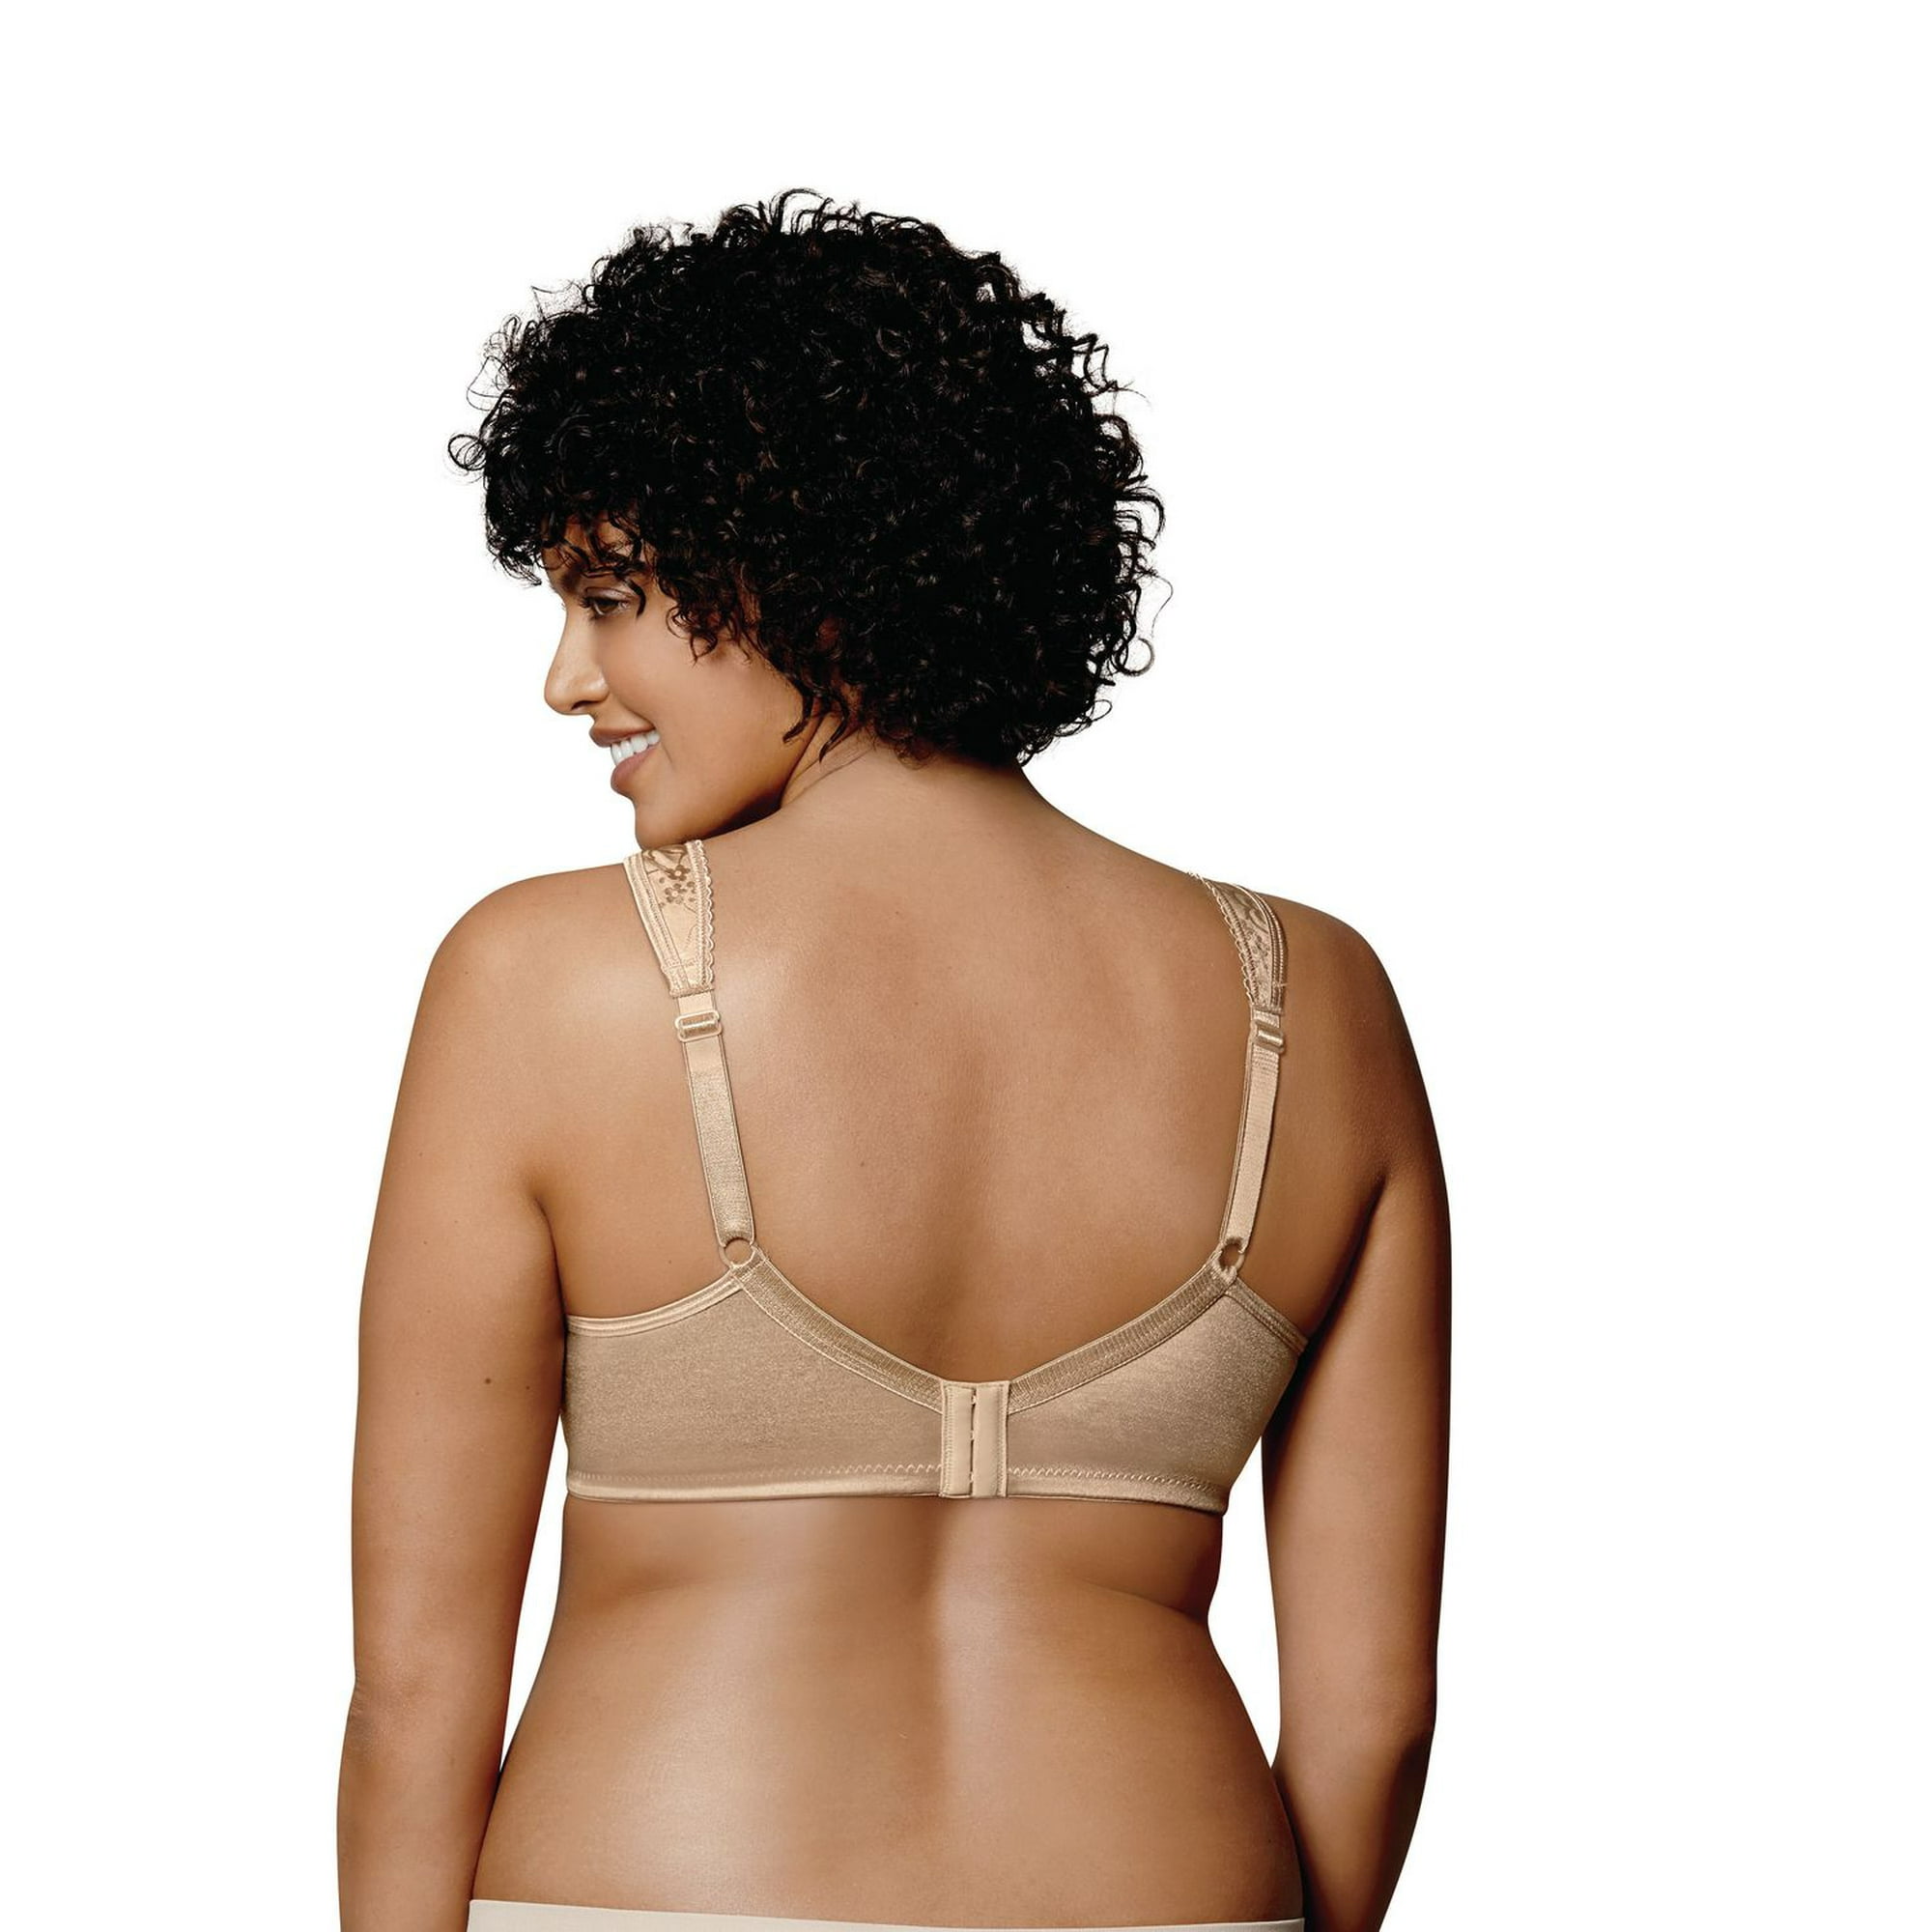 Playtex Lace Bras for Women